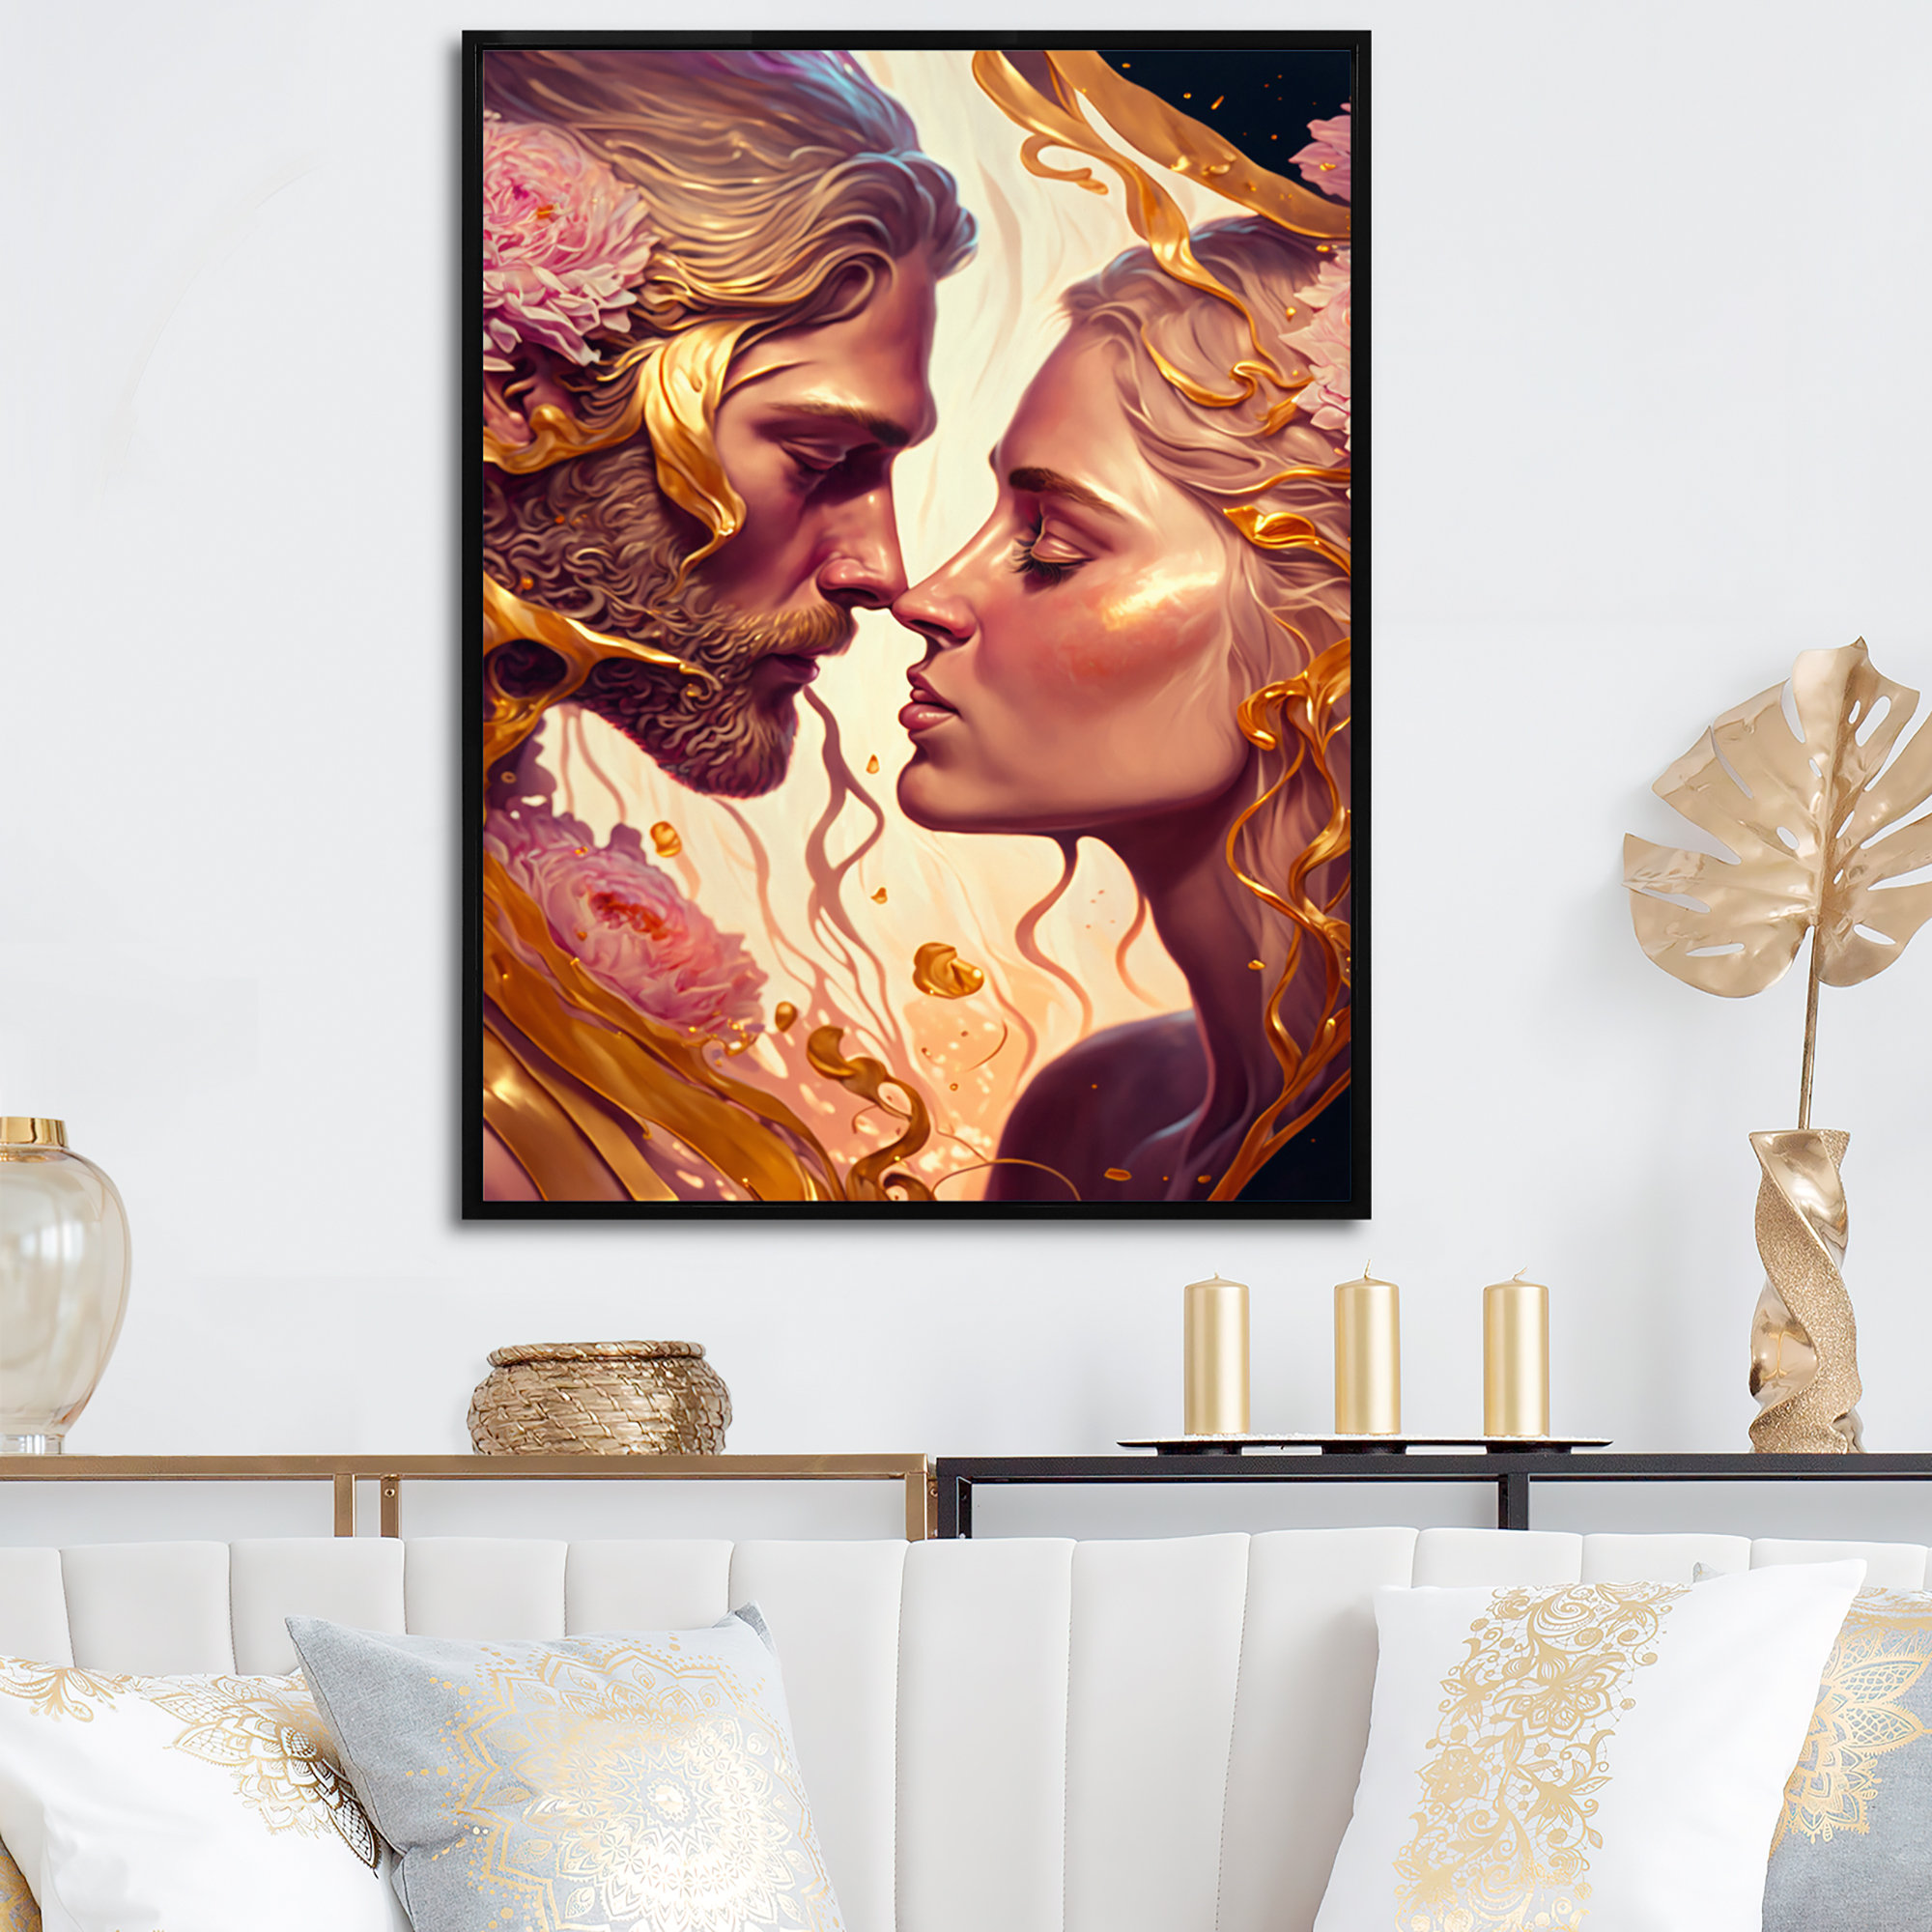 Stupell Industries Romantic Kiss Faces Lips Closeup Couple Drawing, Design  by Ros Ruseva